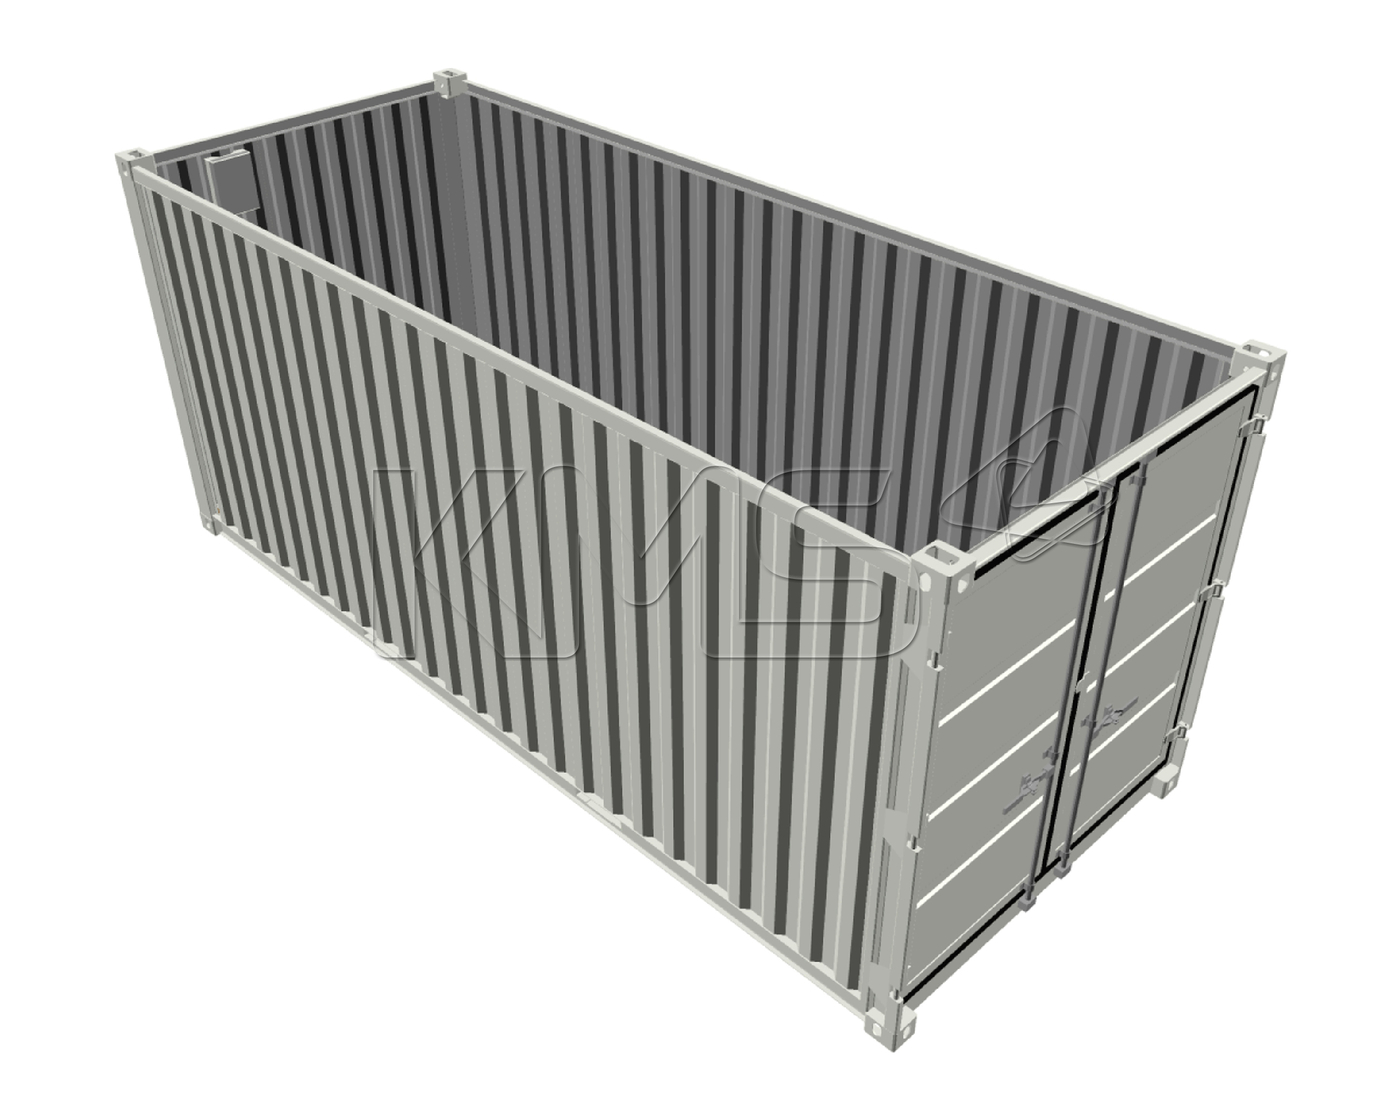  Lagercontainer, Materialcontainer